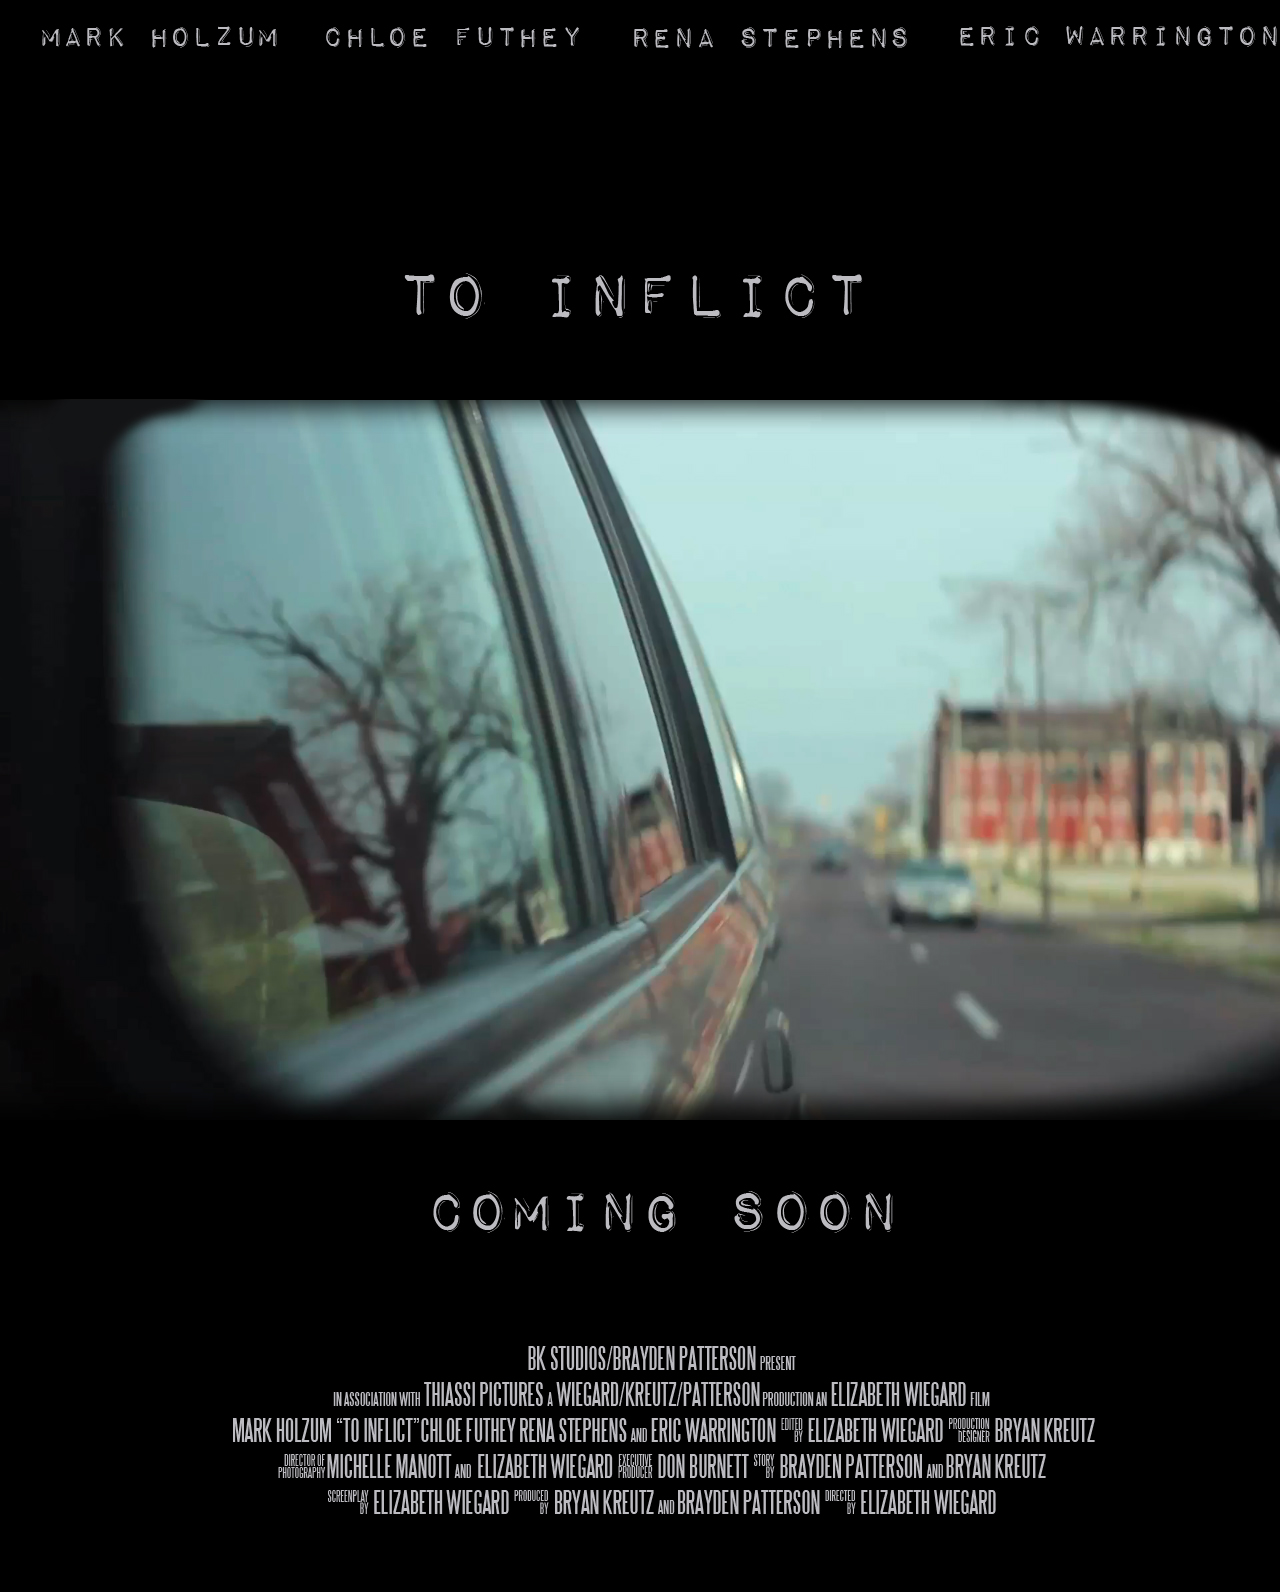 TO INFLICT is a short film about anger.